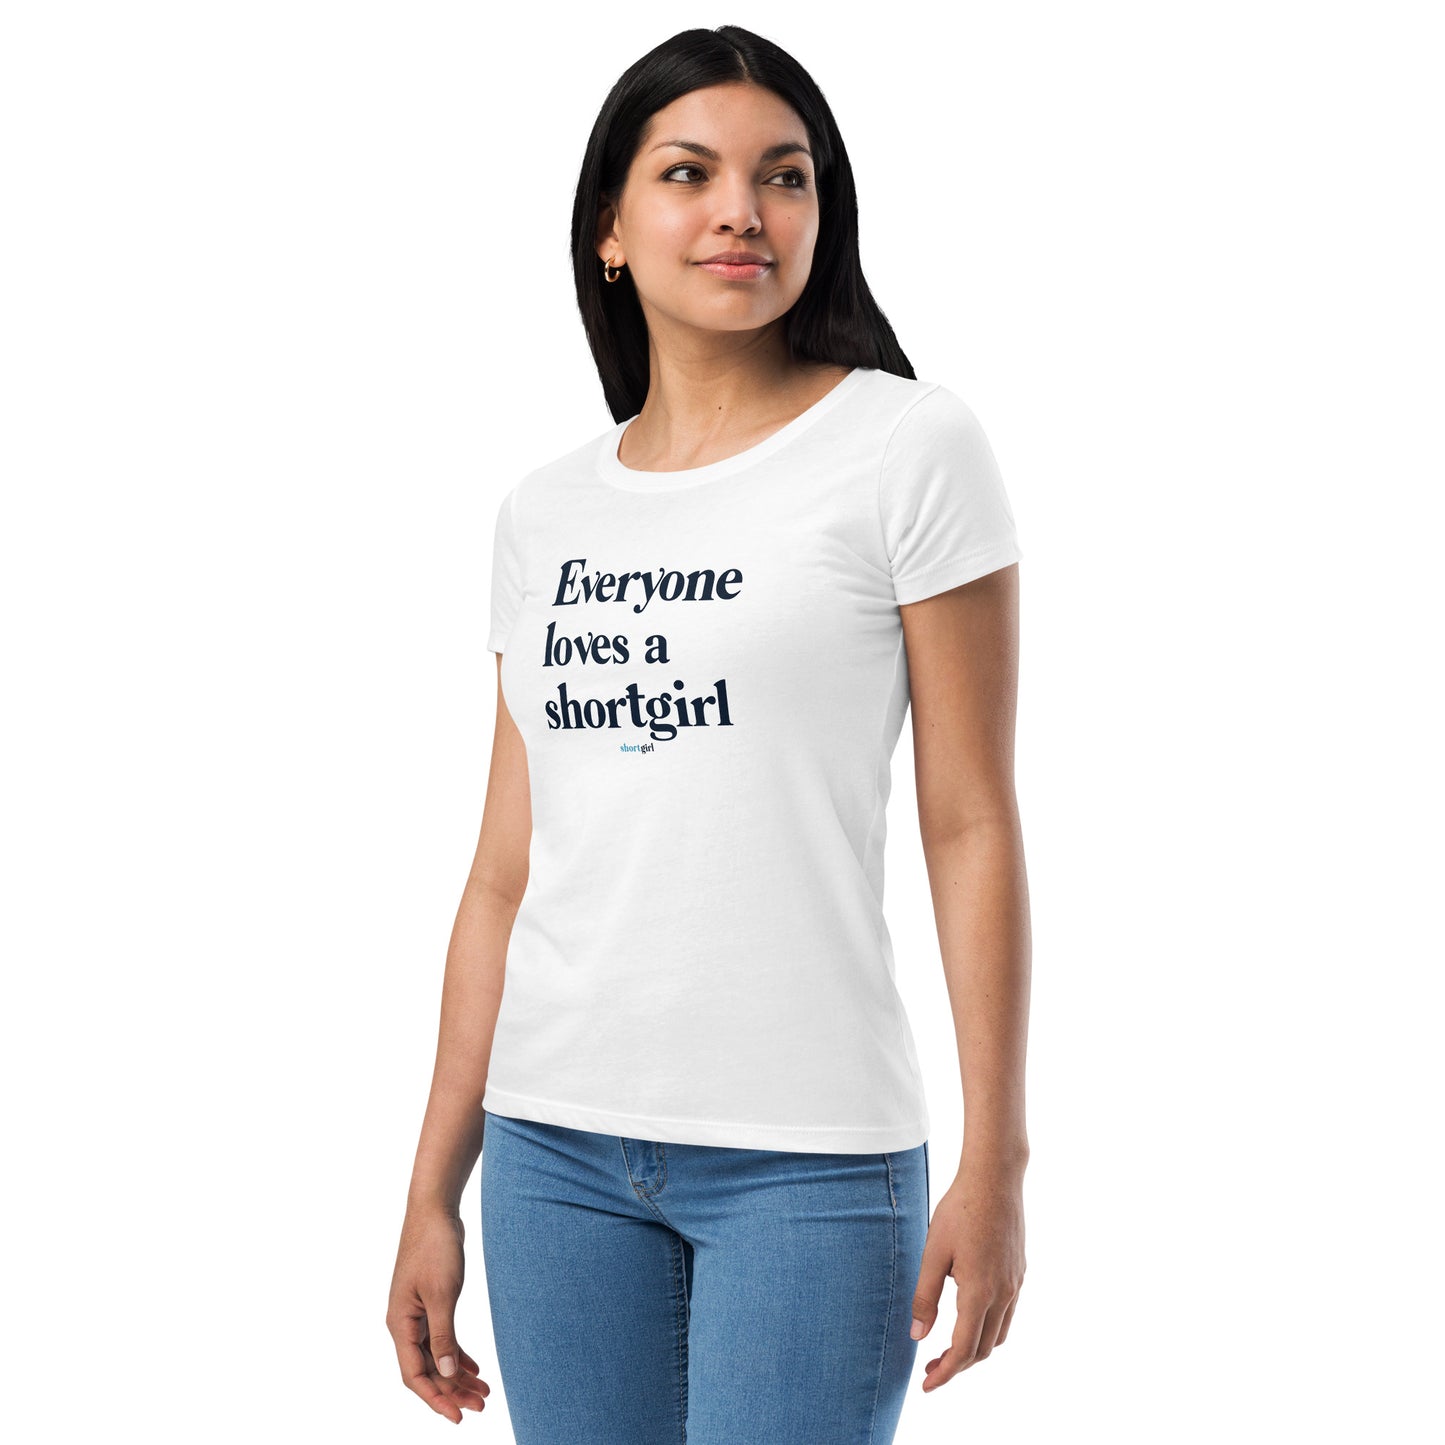 Women’s fitted t-shirt - Everyone loves a shortgirl